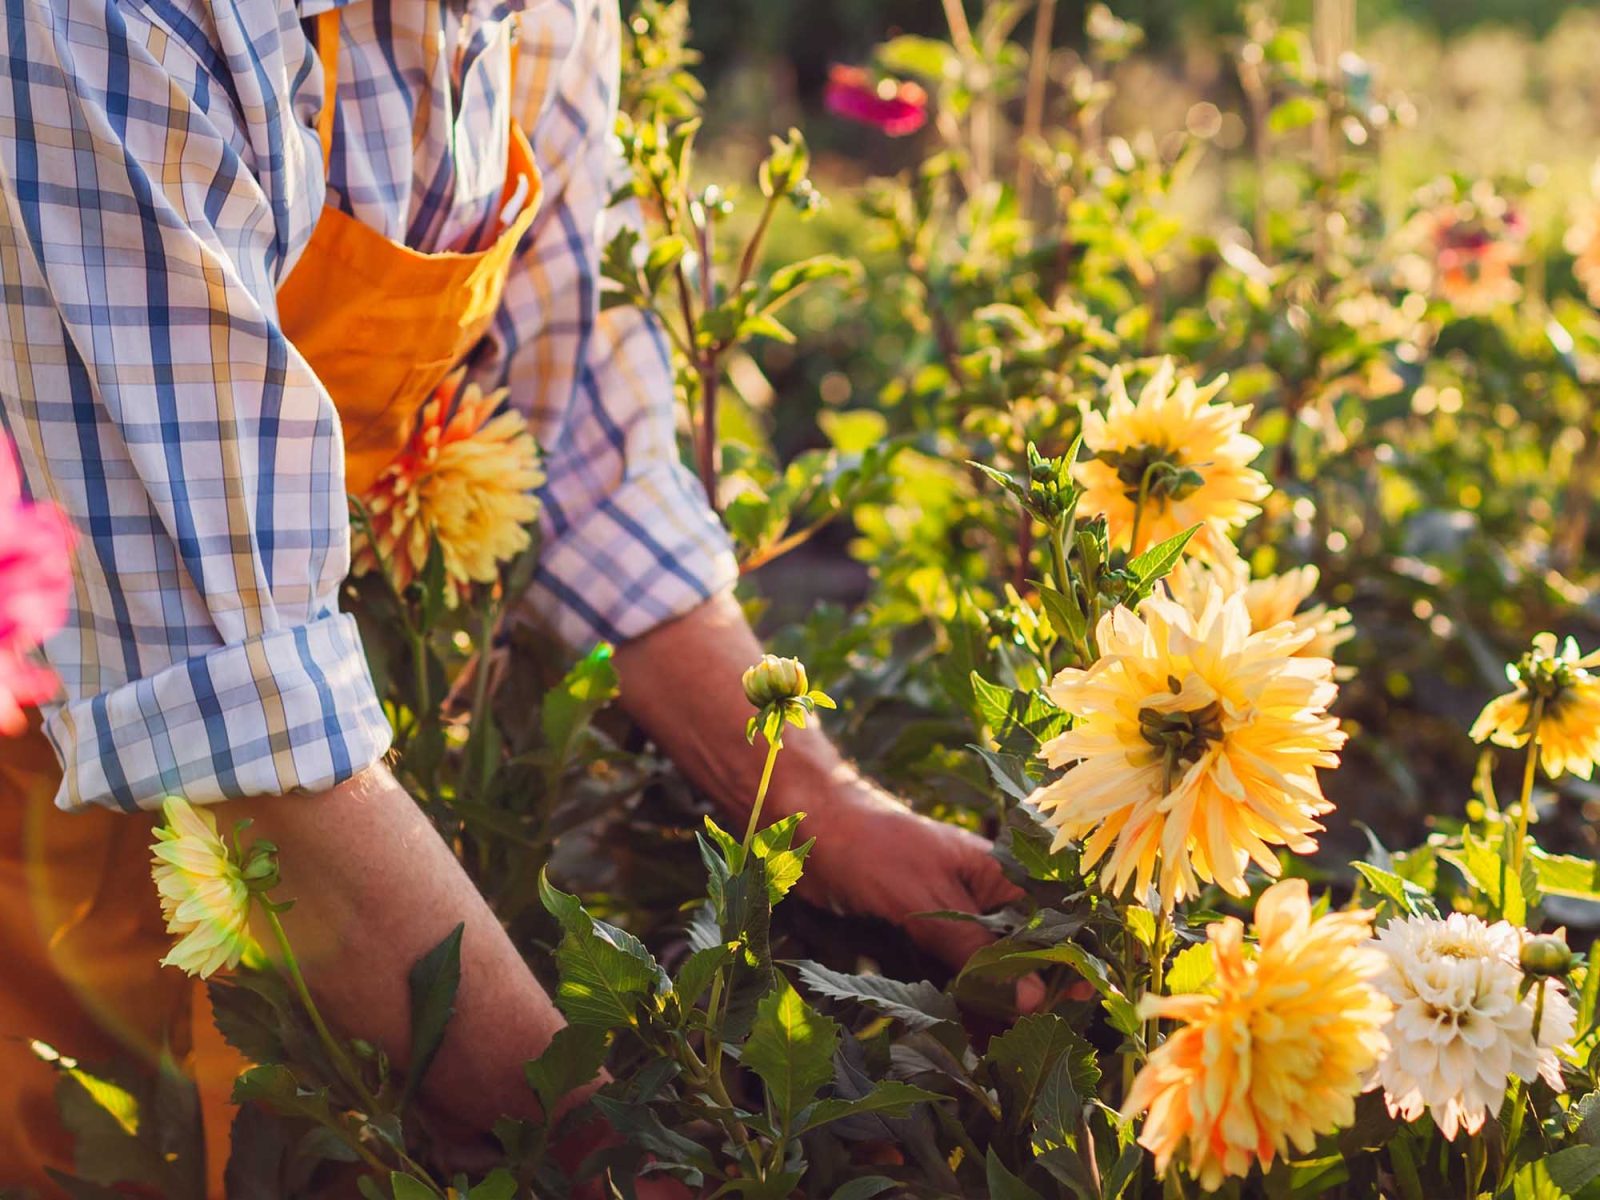 A man gardening and cultivating plants flowers dahlias